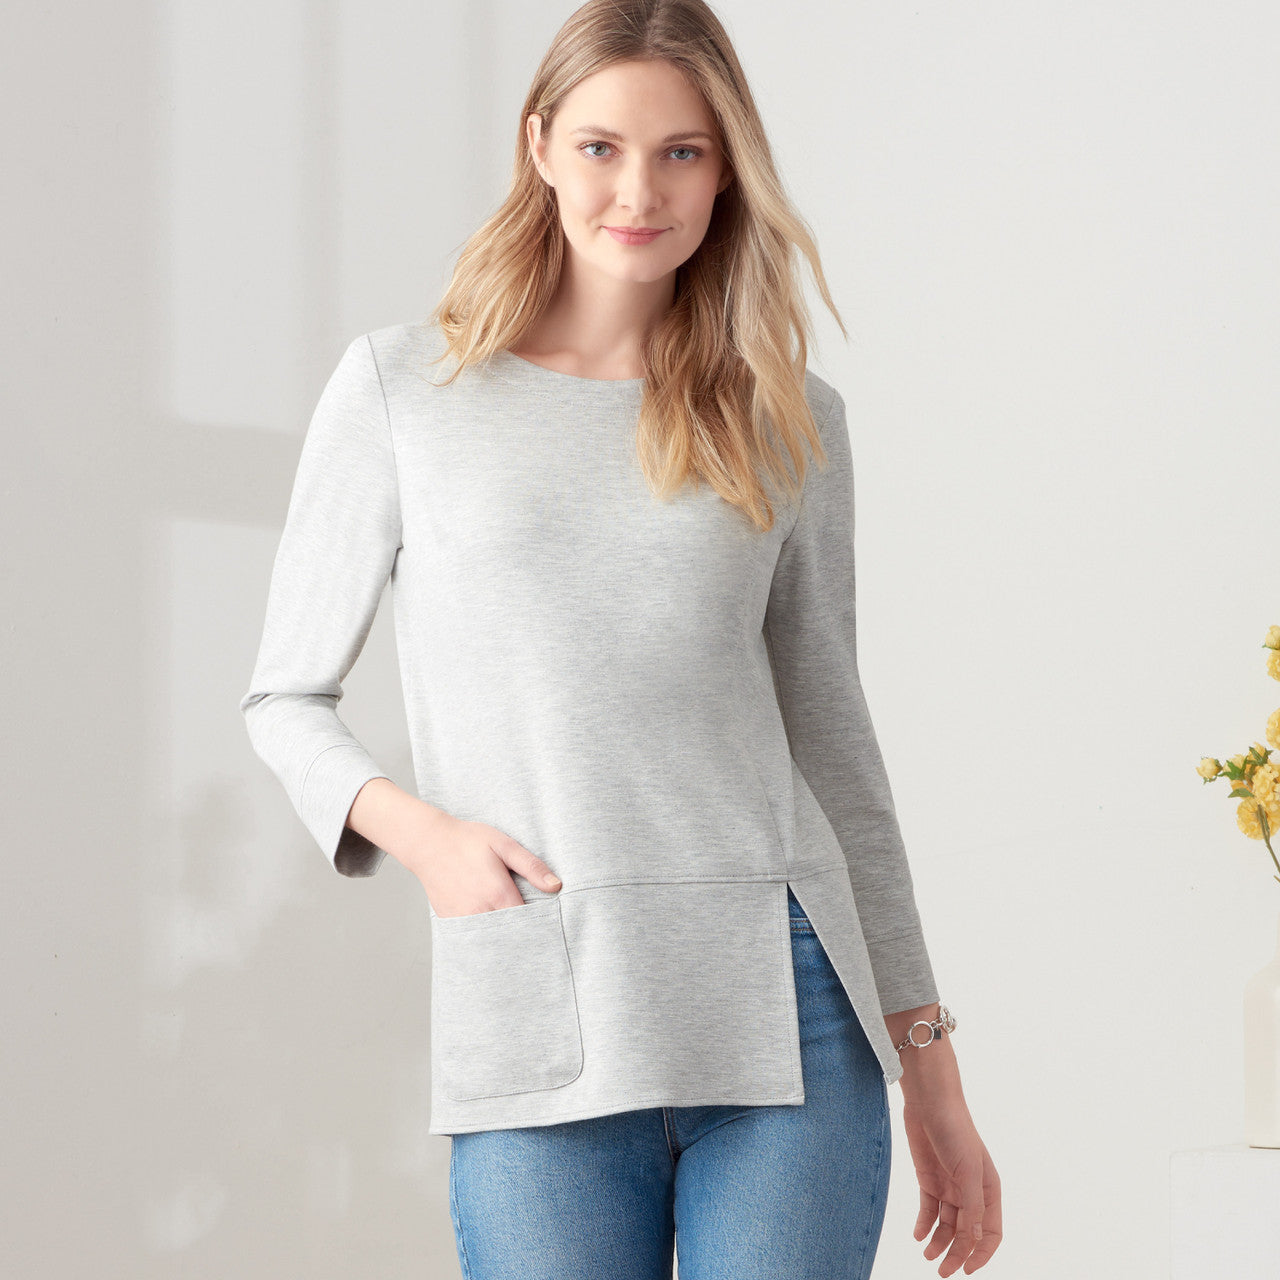 Misses' Knit Tops S9275 Multi-Size Sewing Pattern